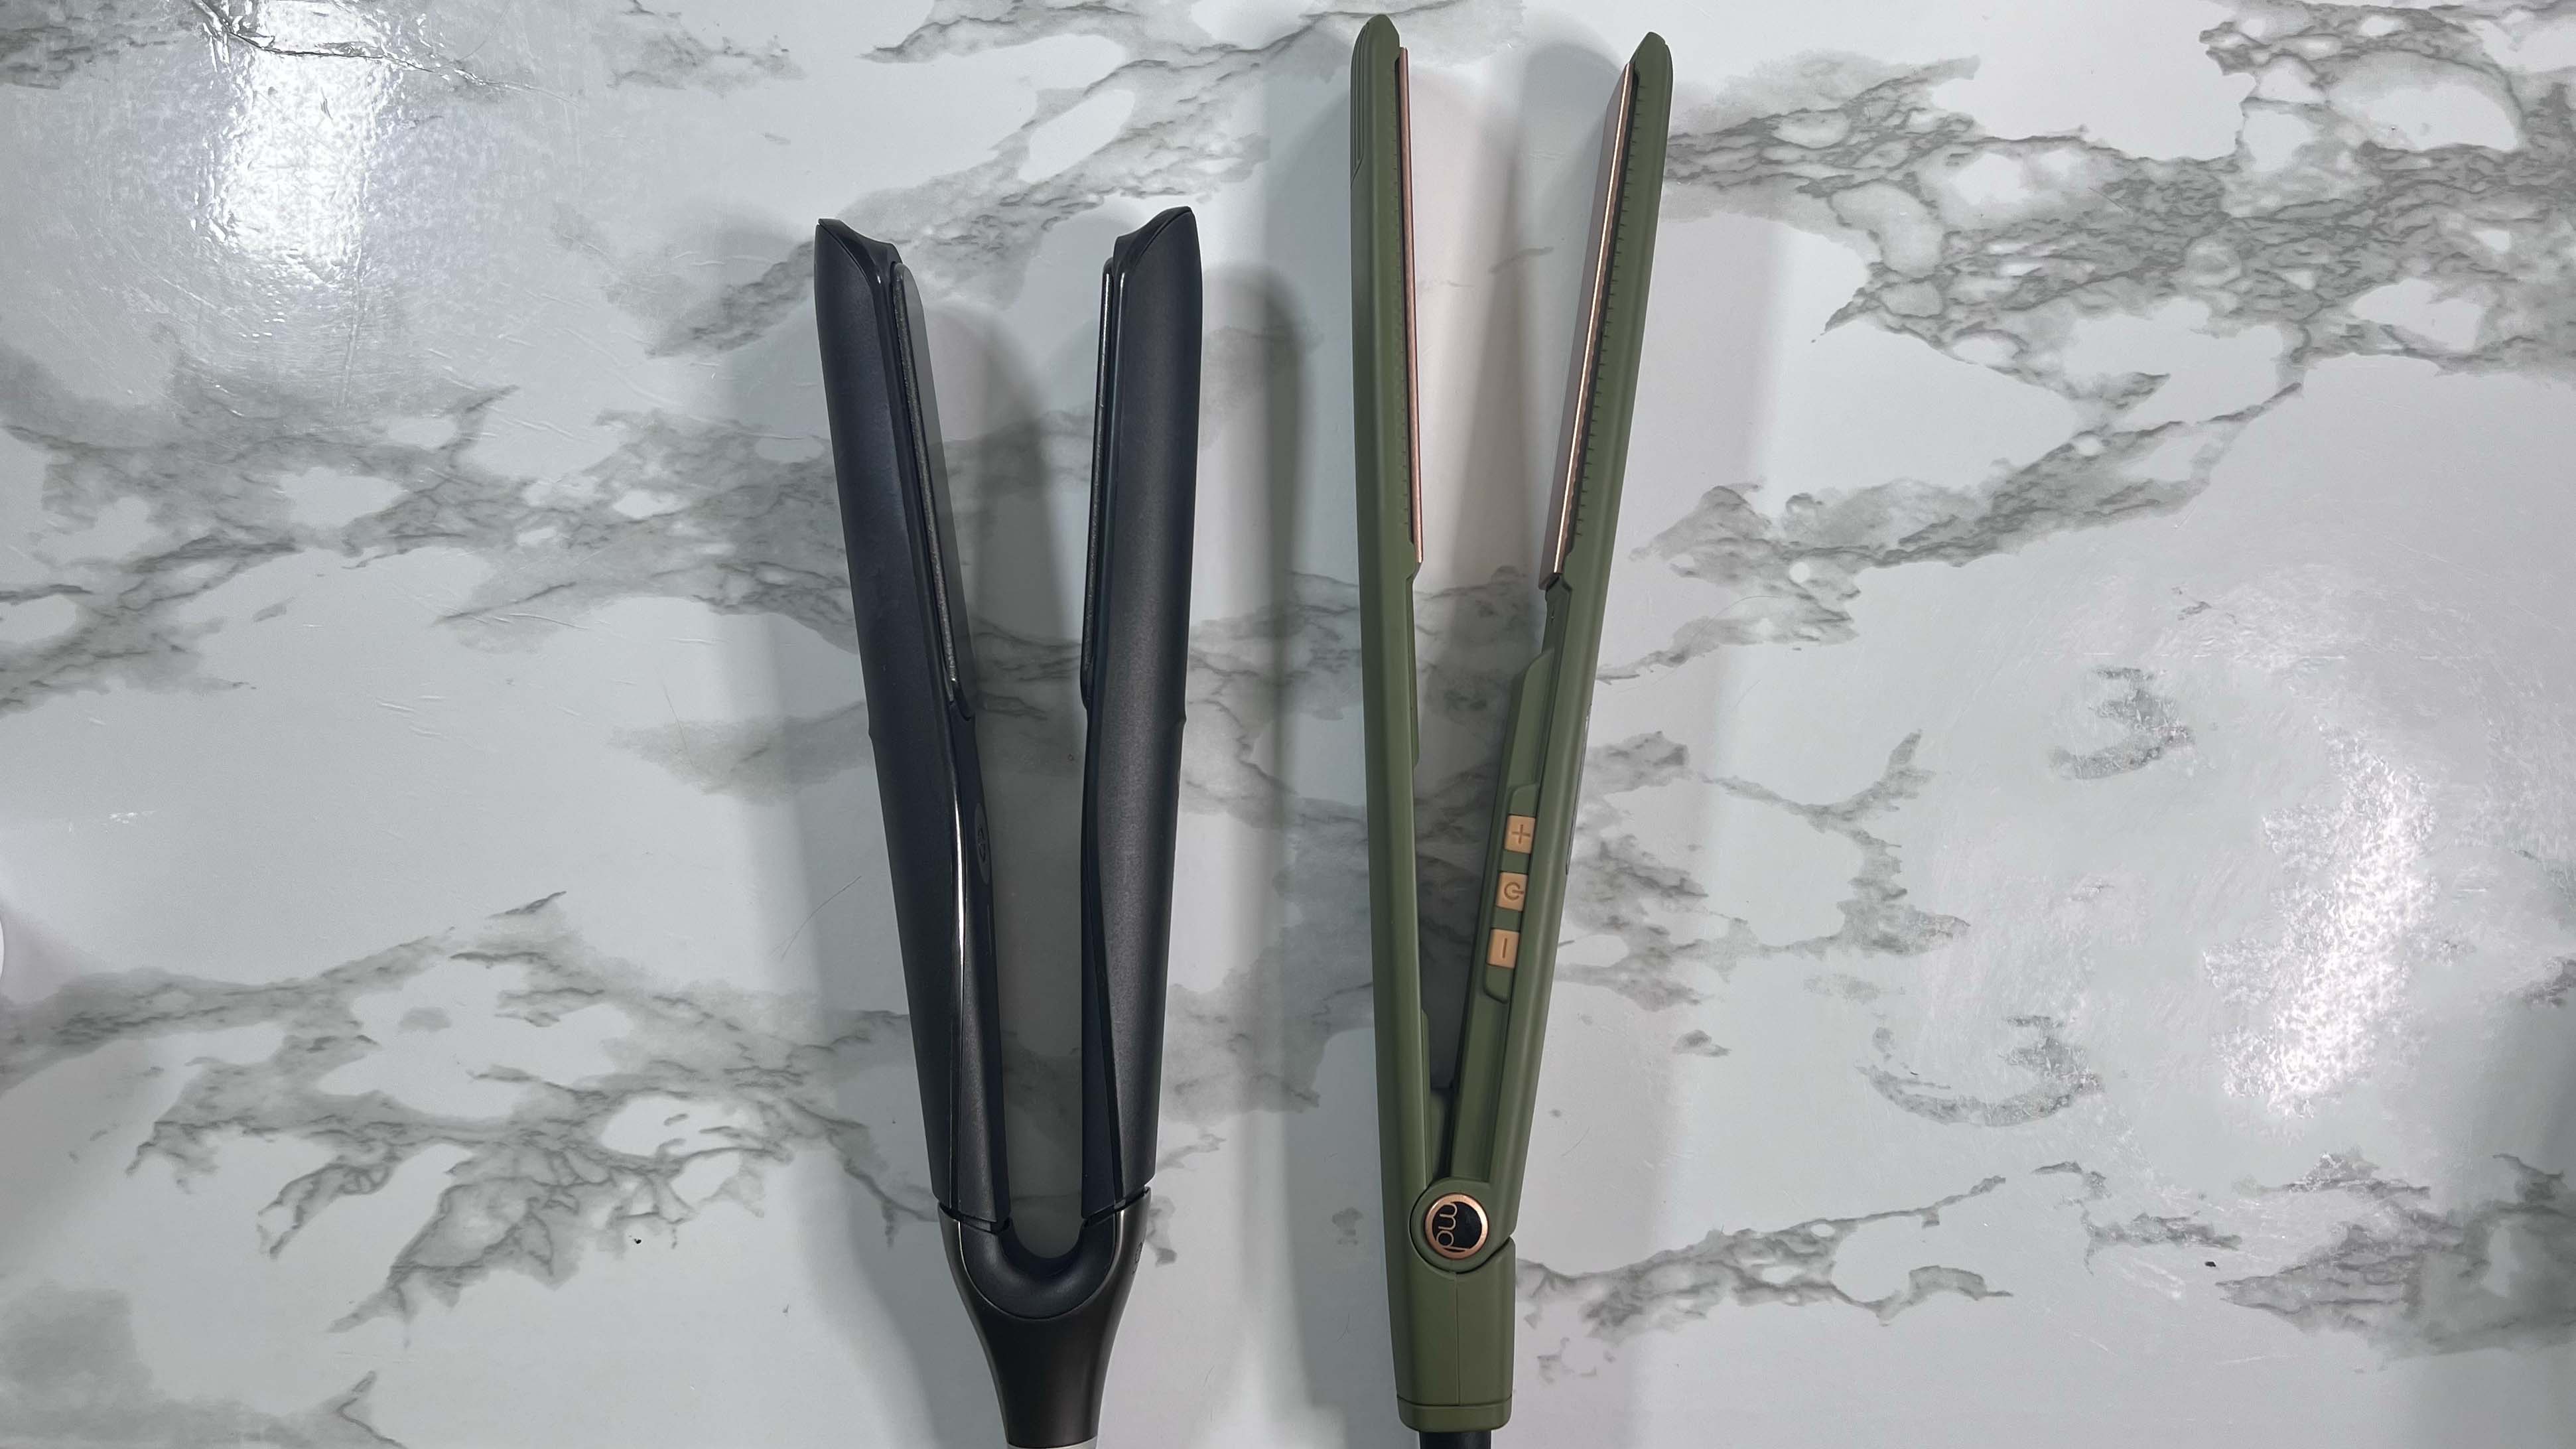 mdlondon STRAIT hair straighteners in reviewer's home